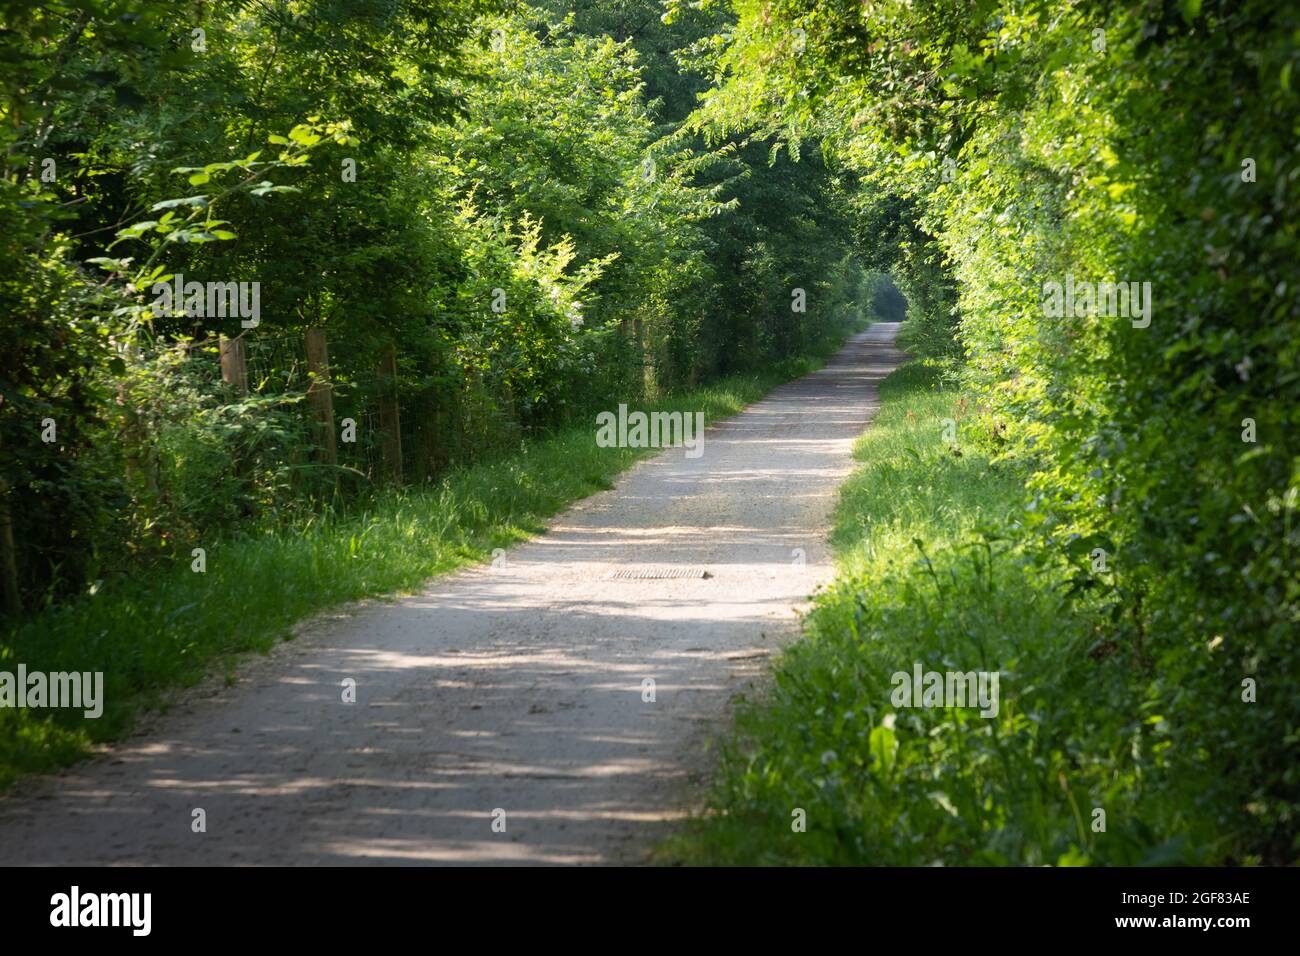 Walking path along Emscher river, area of the Ruhr, Germany Stock Photo